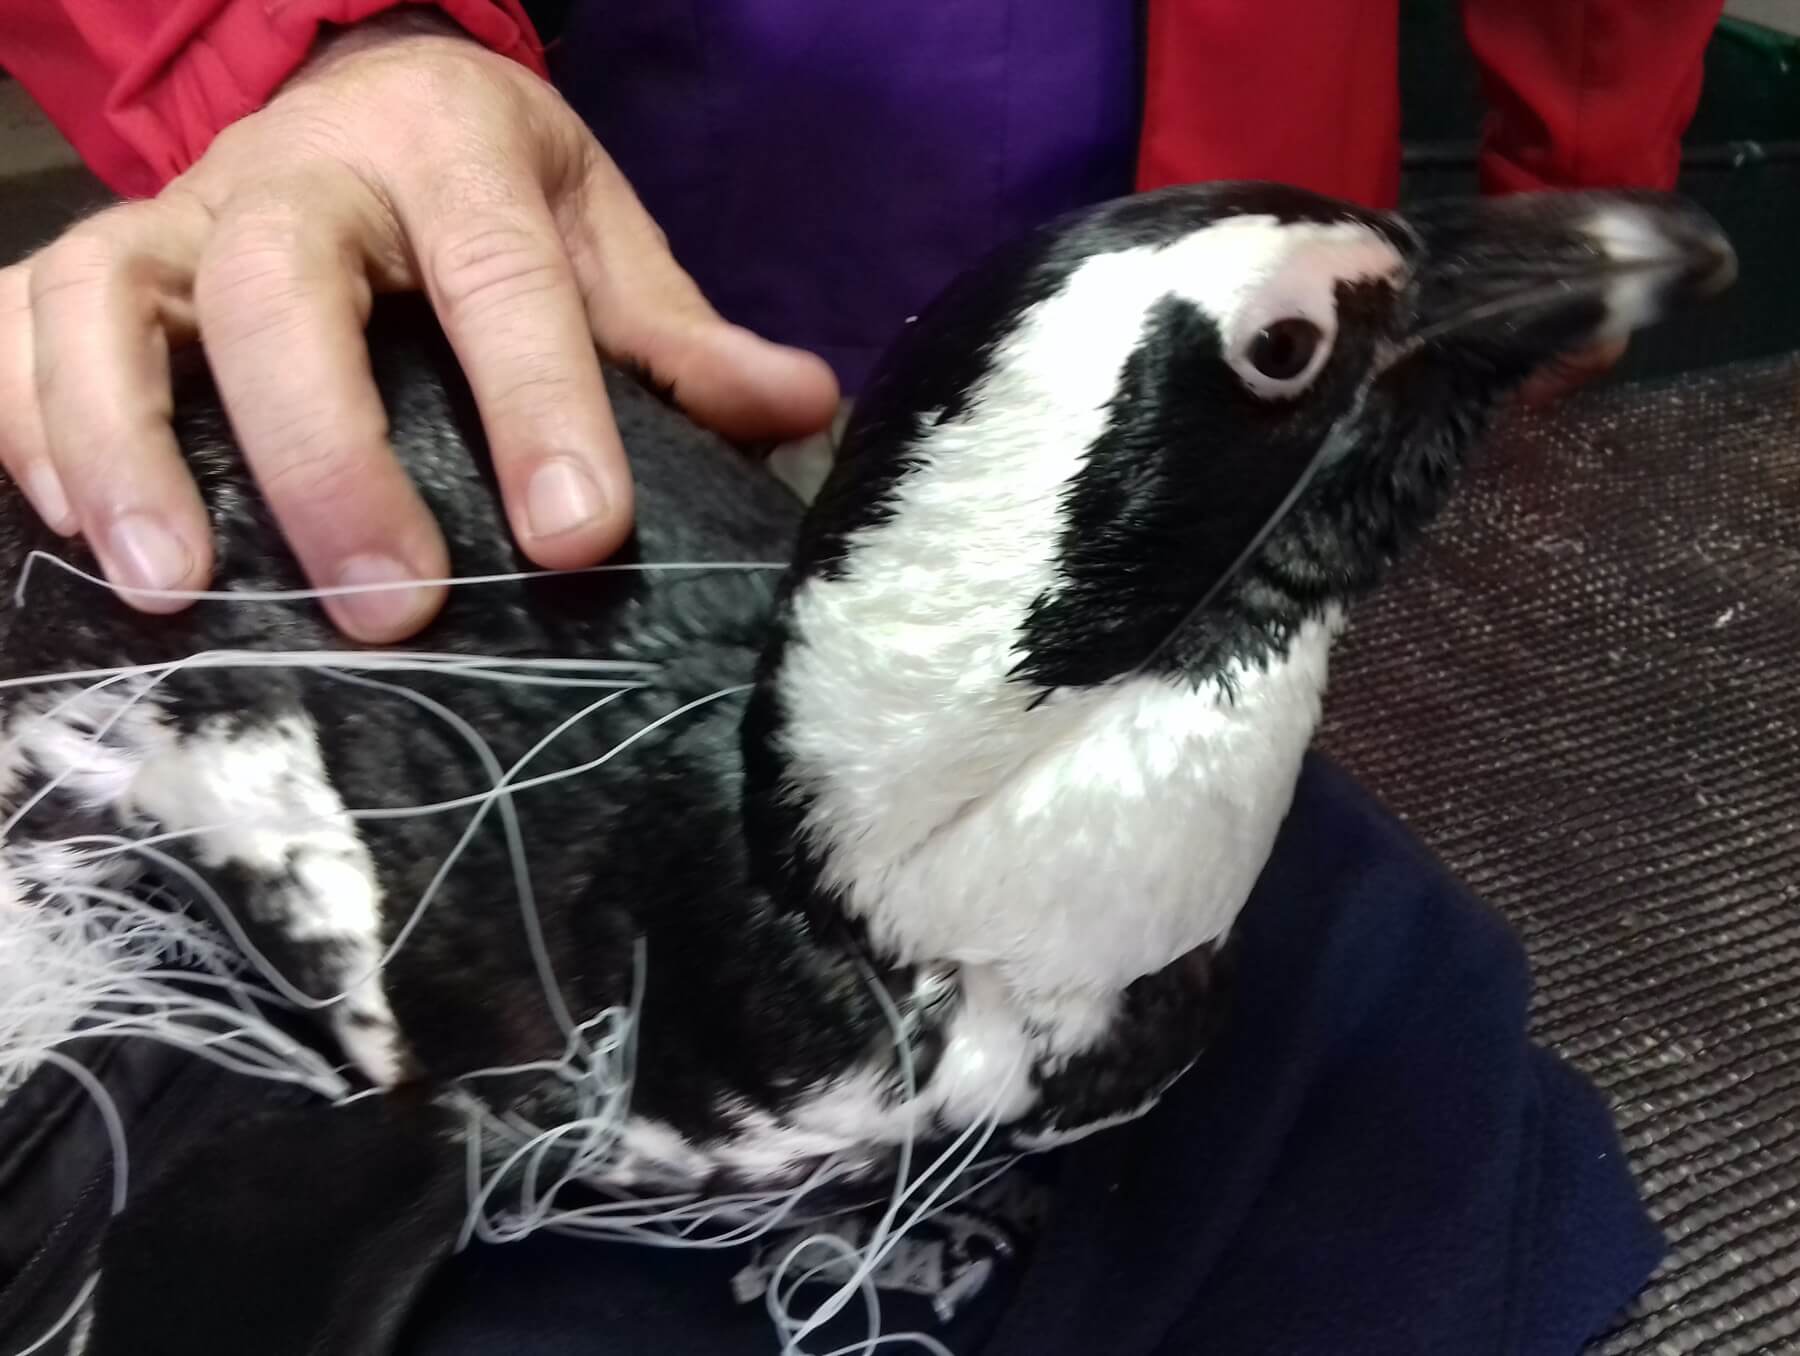 Fishing Line & Penguin, Not A Good Fit